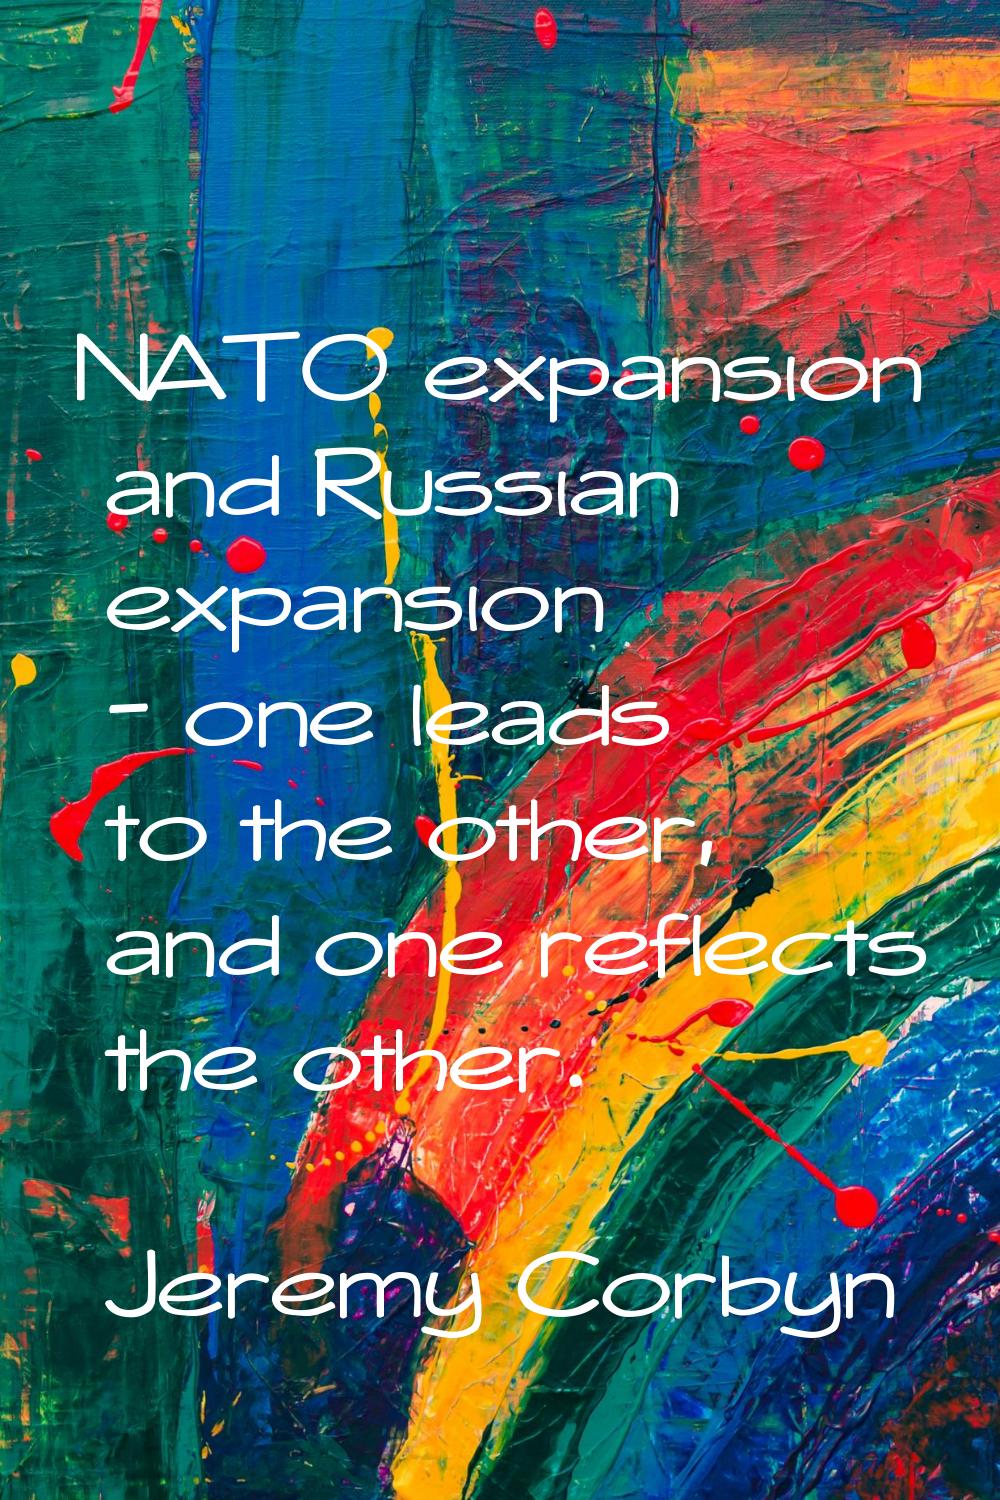 NATO expansion and Russian expansion - one leads to the other, and one reflects the other.